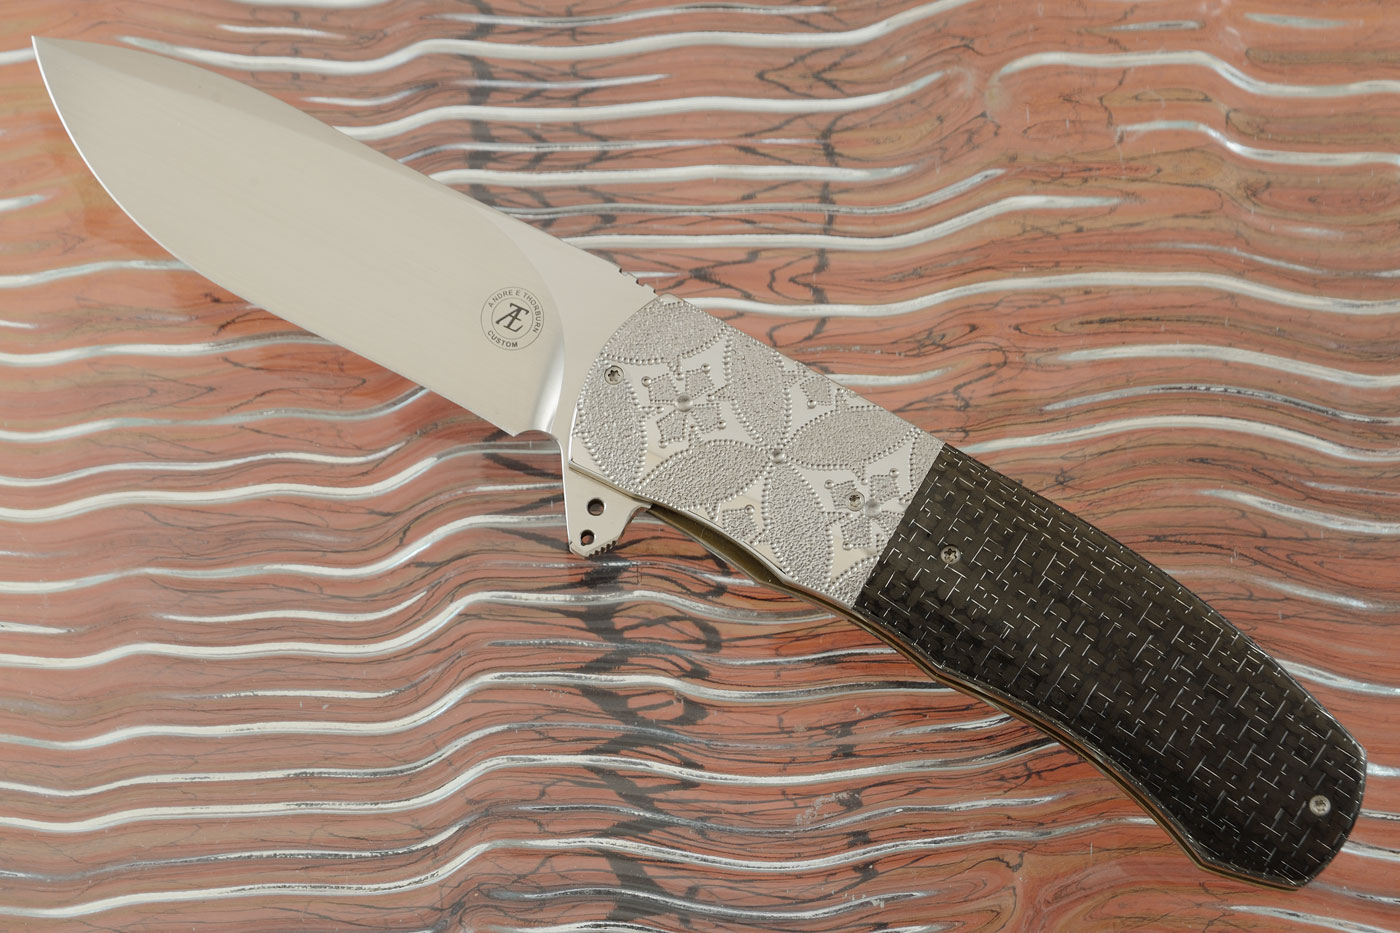 L46 Flipper with Silver Strike Carbon Fiber and Engraved Stainless Steel (Ceramic IKBS)